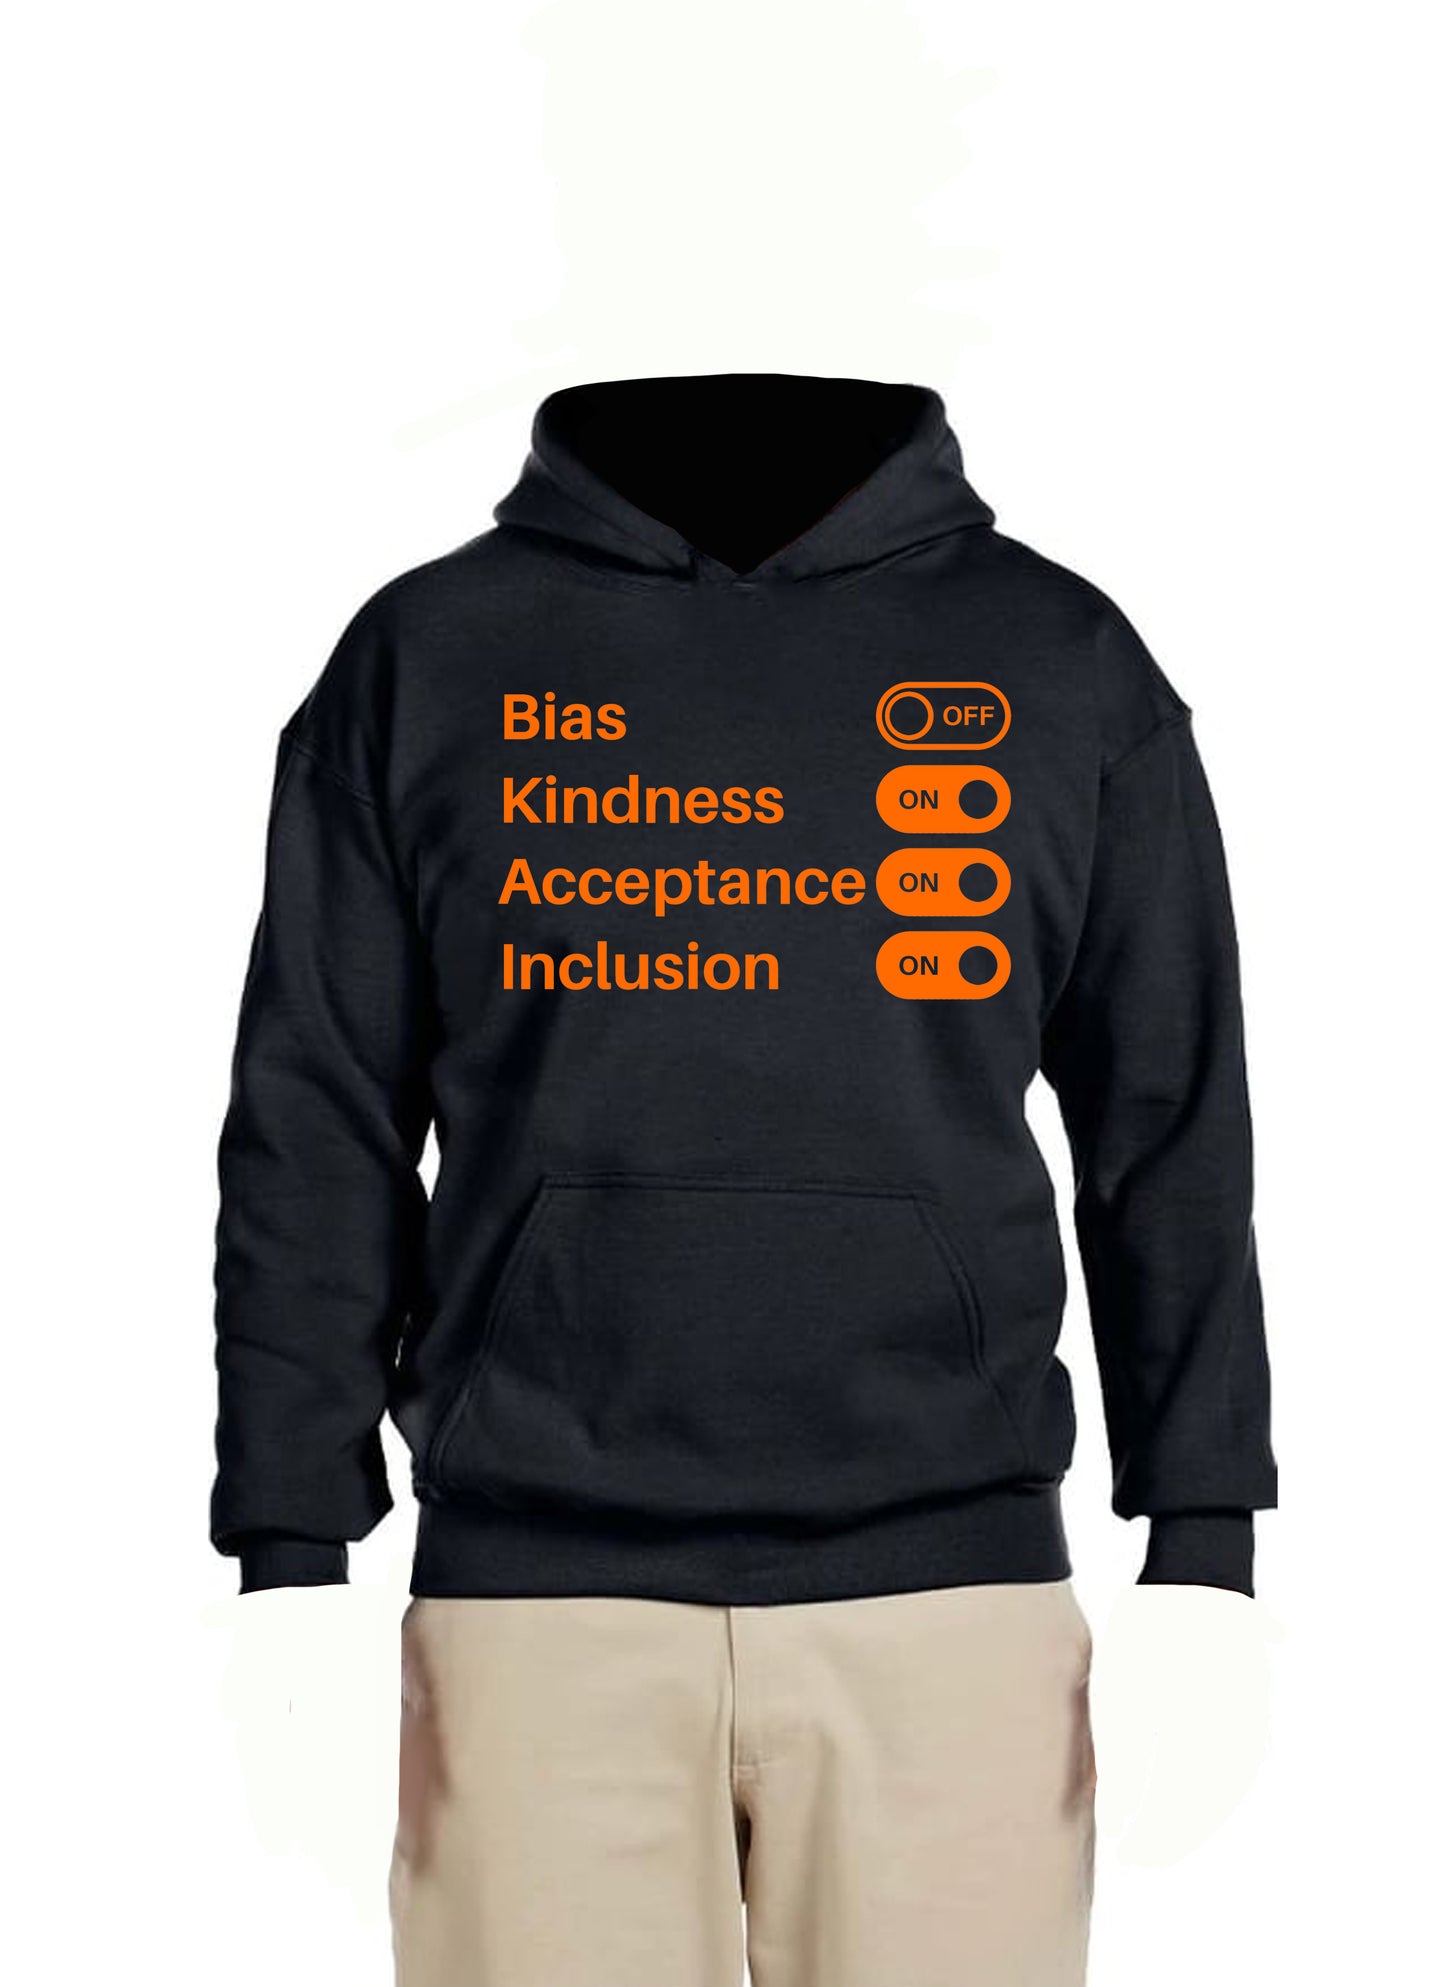 AACPS Unity Day Hoodie